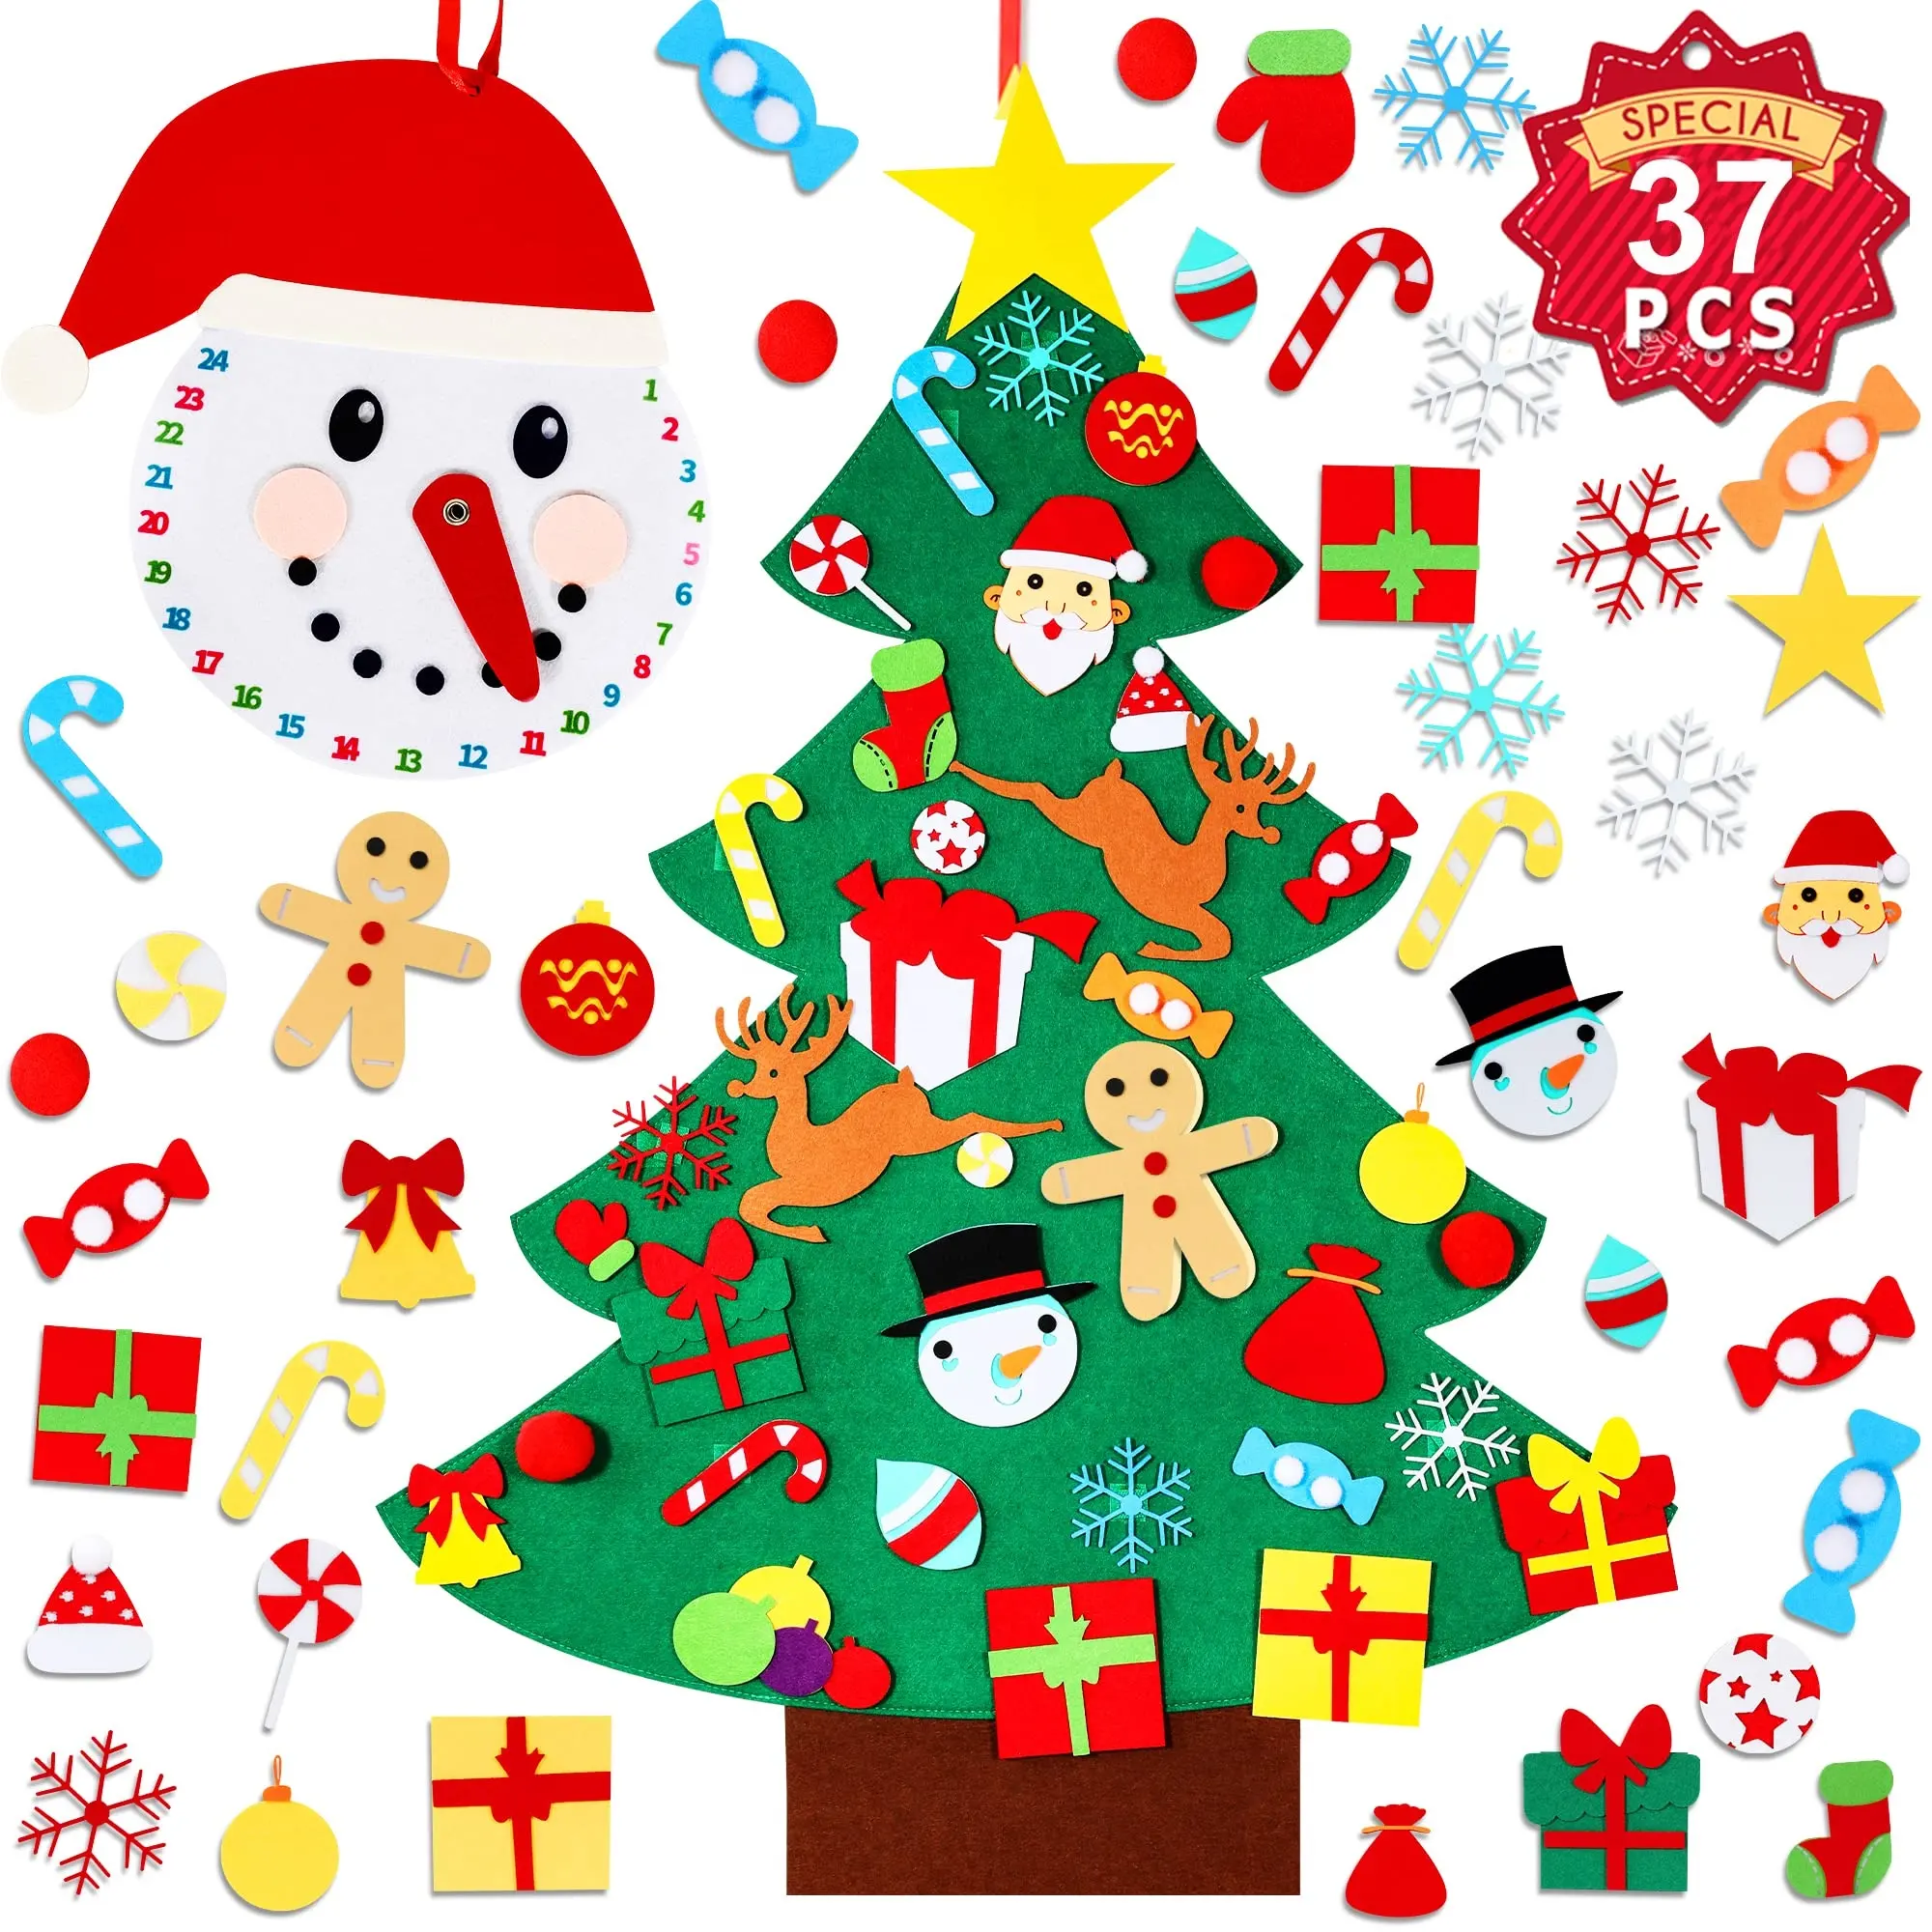 Christmas New Year Craft Gifts Wall Hanging DIY Decorations Hanging Kids Felt Christmas Tree